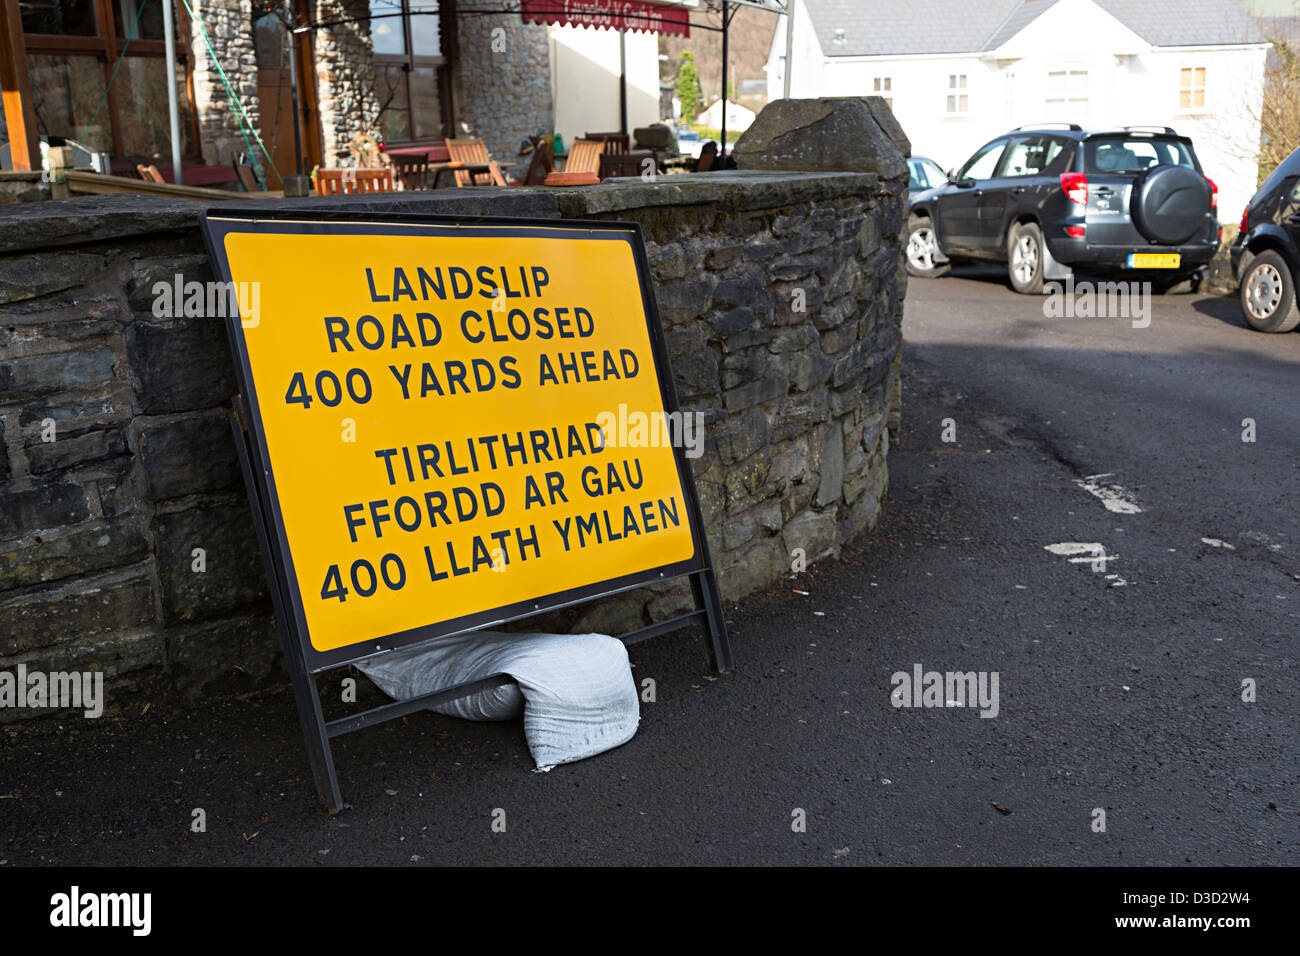 Landslip road closed sign in English and Welsh, Cardiff, Wales, UK Stock Photo